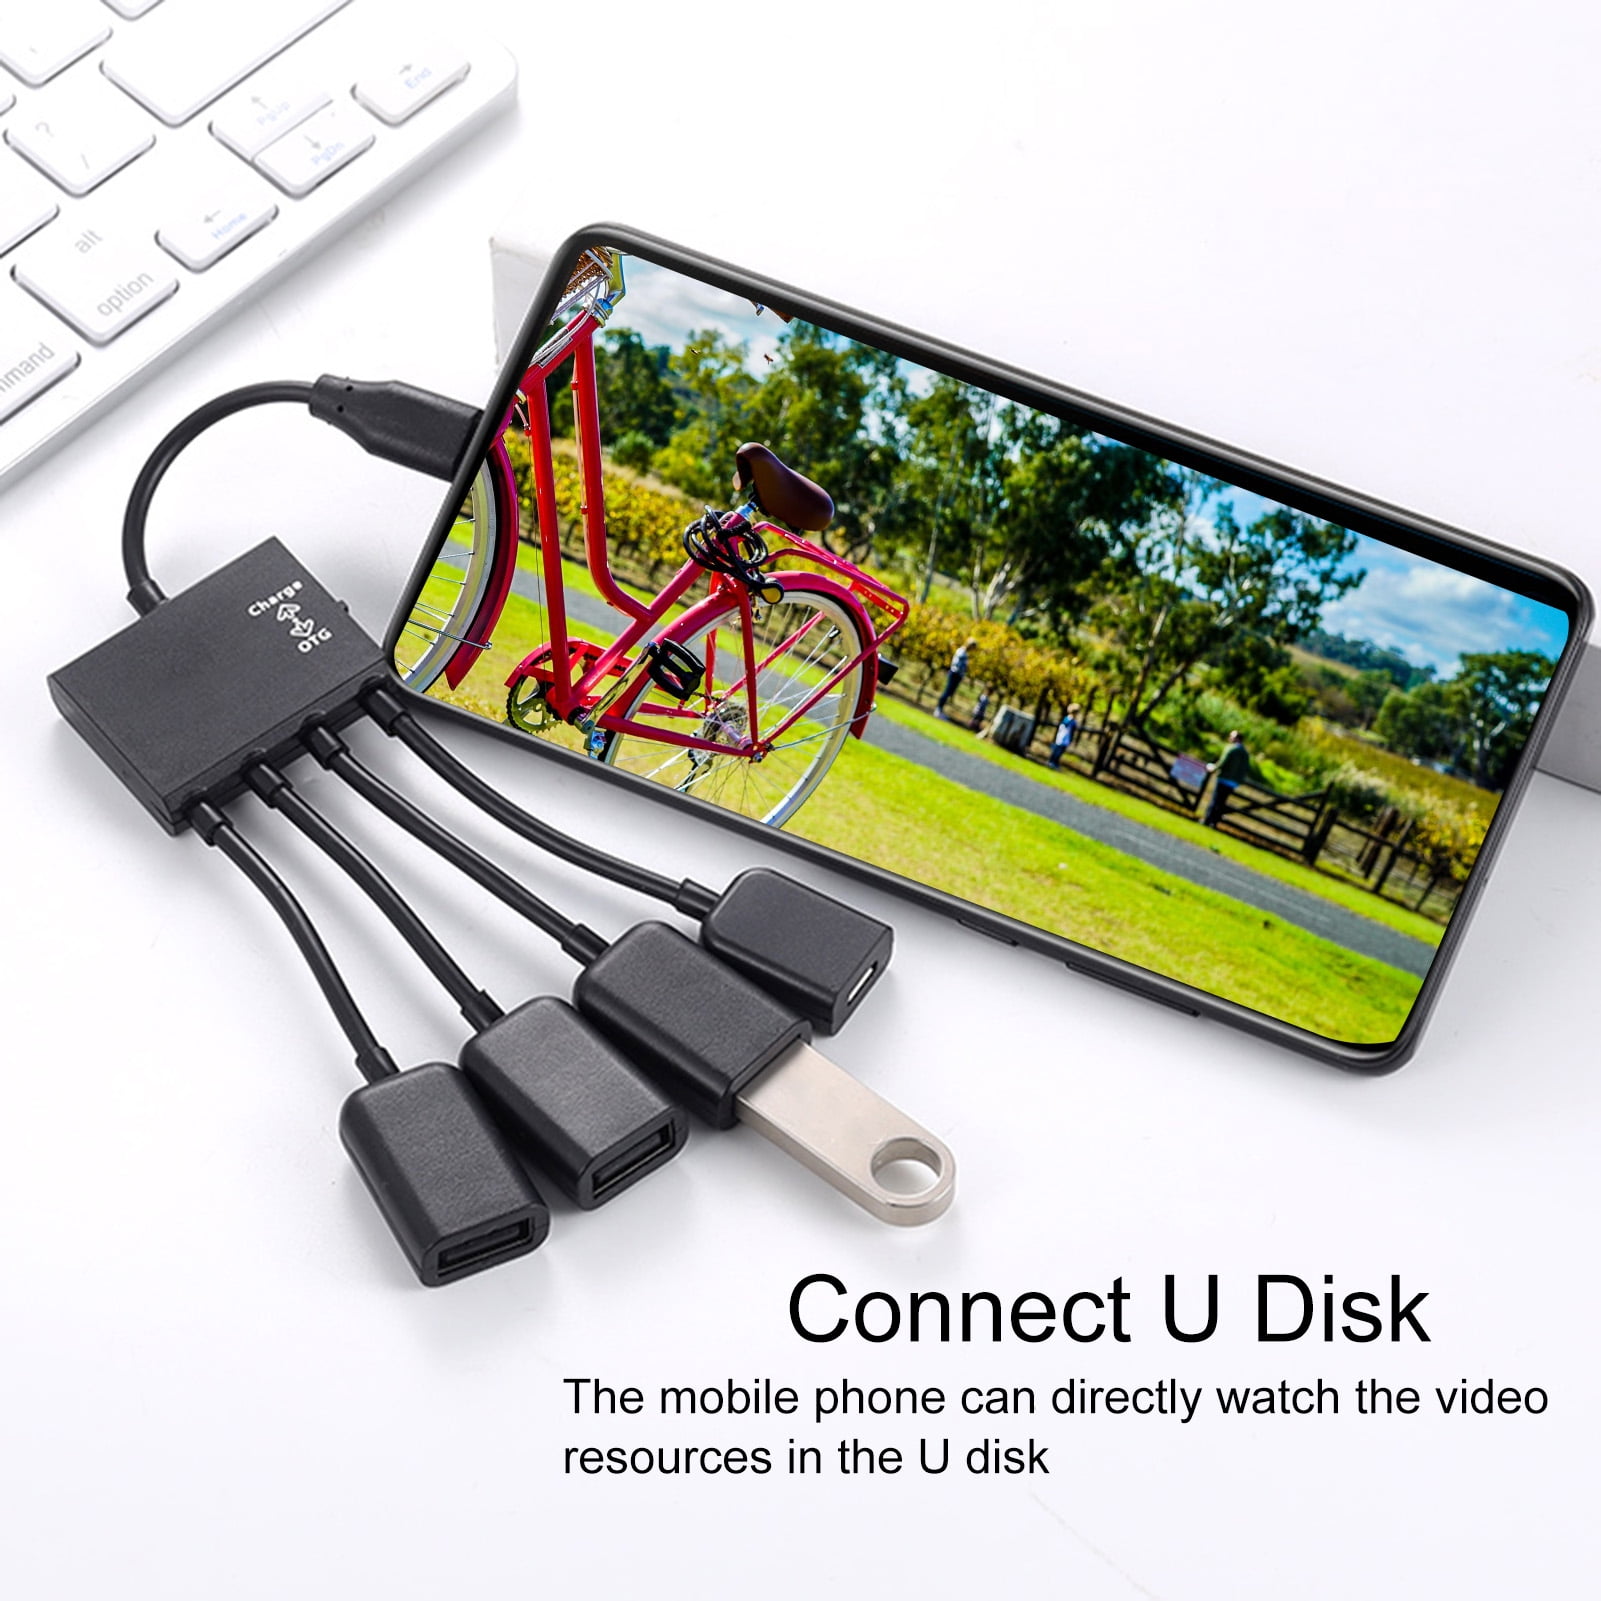 Usb Micro To Usb C Adapter 4-in-1 Otg Cable 1a/2a For Diy Data